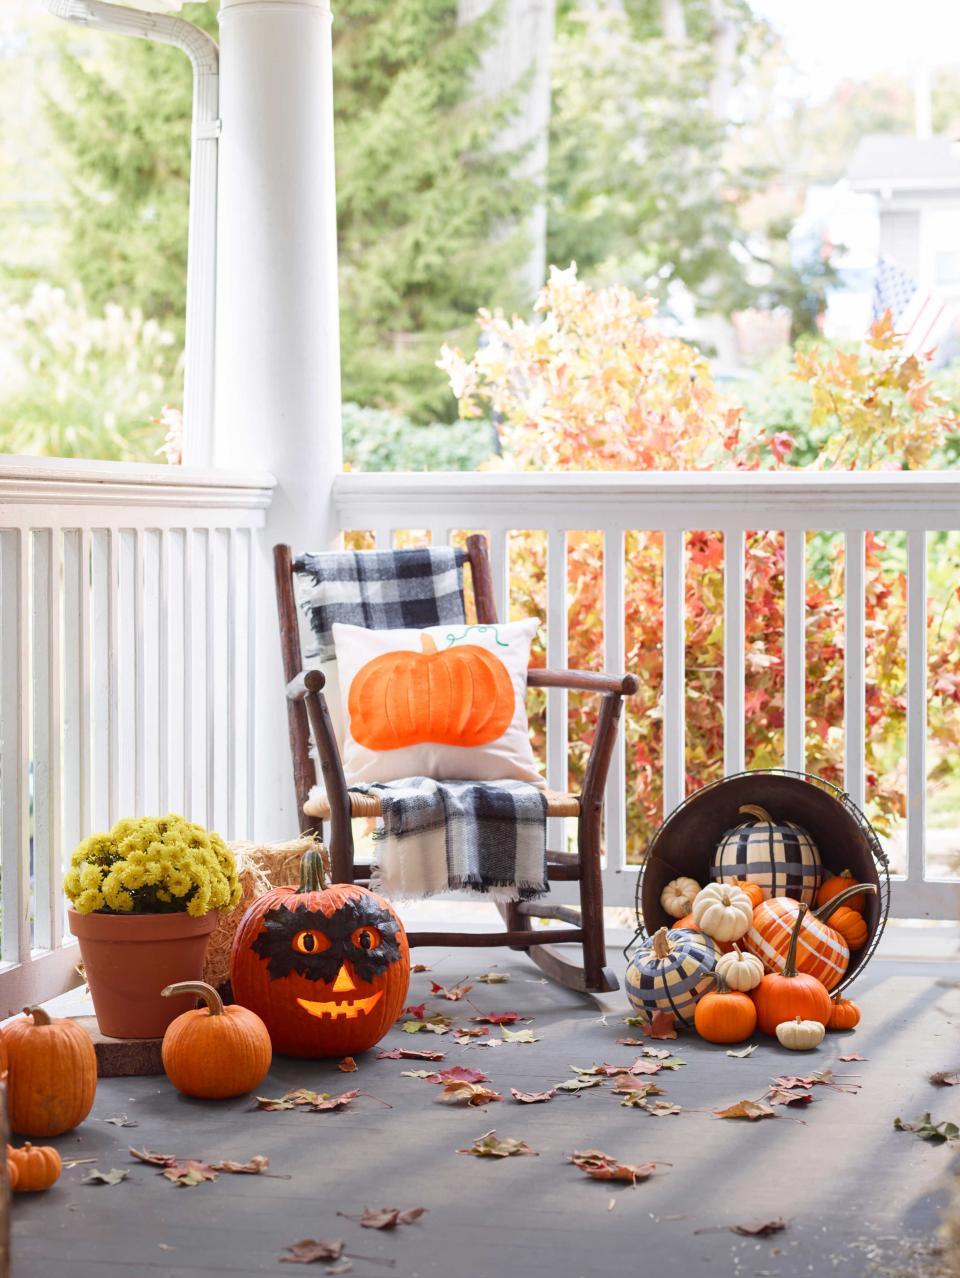 70 Cool Pumpkin Painting Ideas That Are So Cute (and Just a Little Bit Scary)